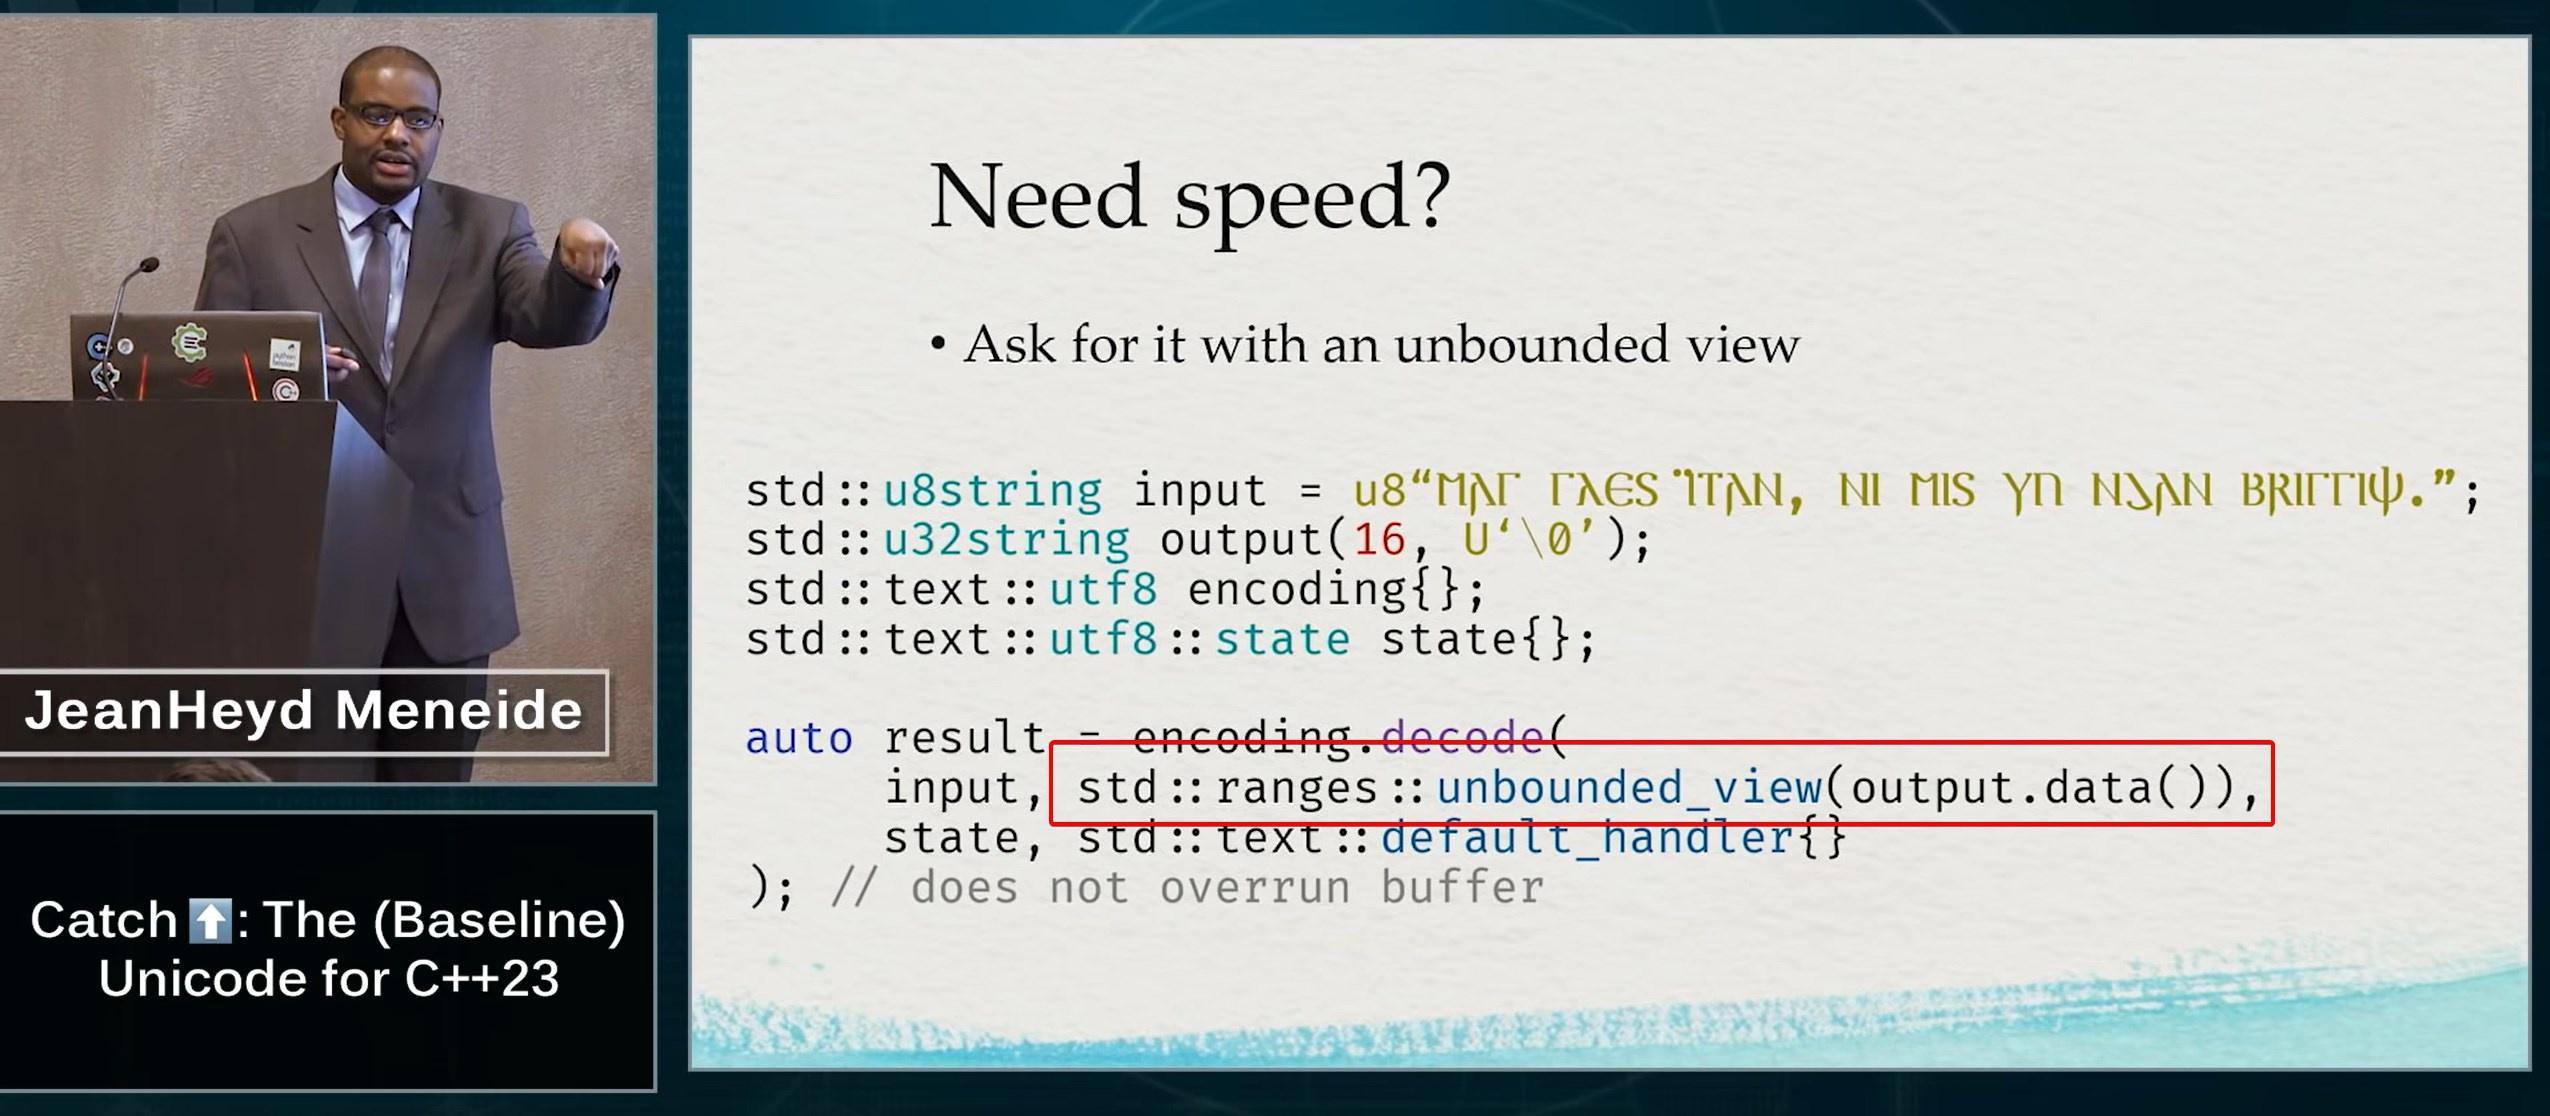 A screenshot of a presentation titled "Catch ⬆️: Unicode for C++23". This slide in particular demonstrations using a "std::span" for output purposes, then an "unbounded_view", and then an "unbounded_view" with an "assume_valid" handler for even more speed.